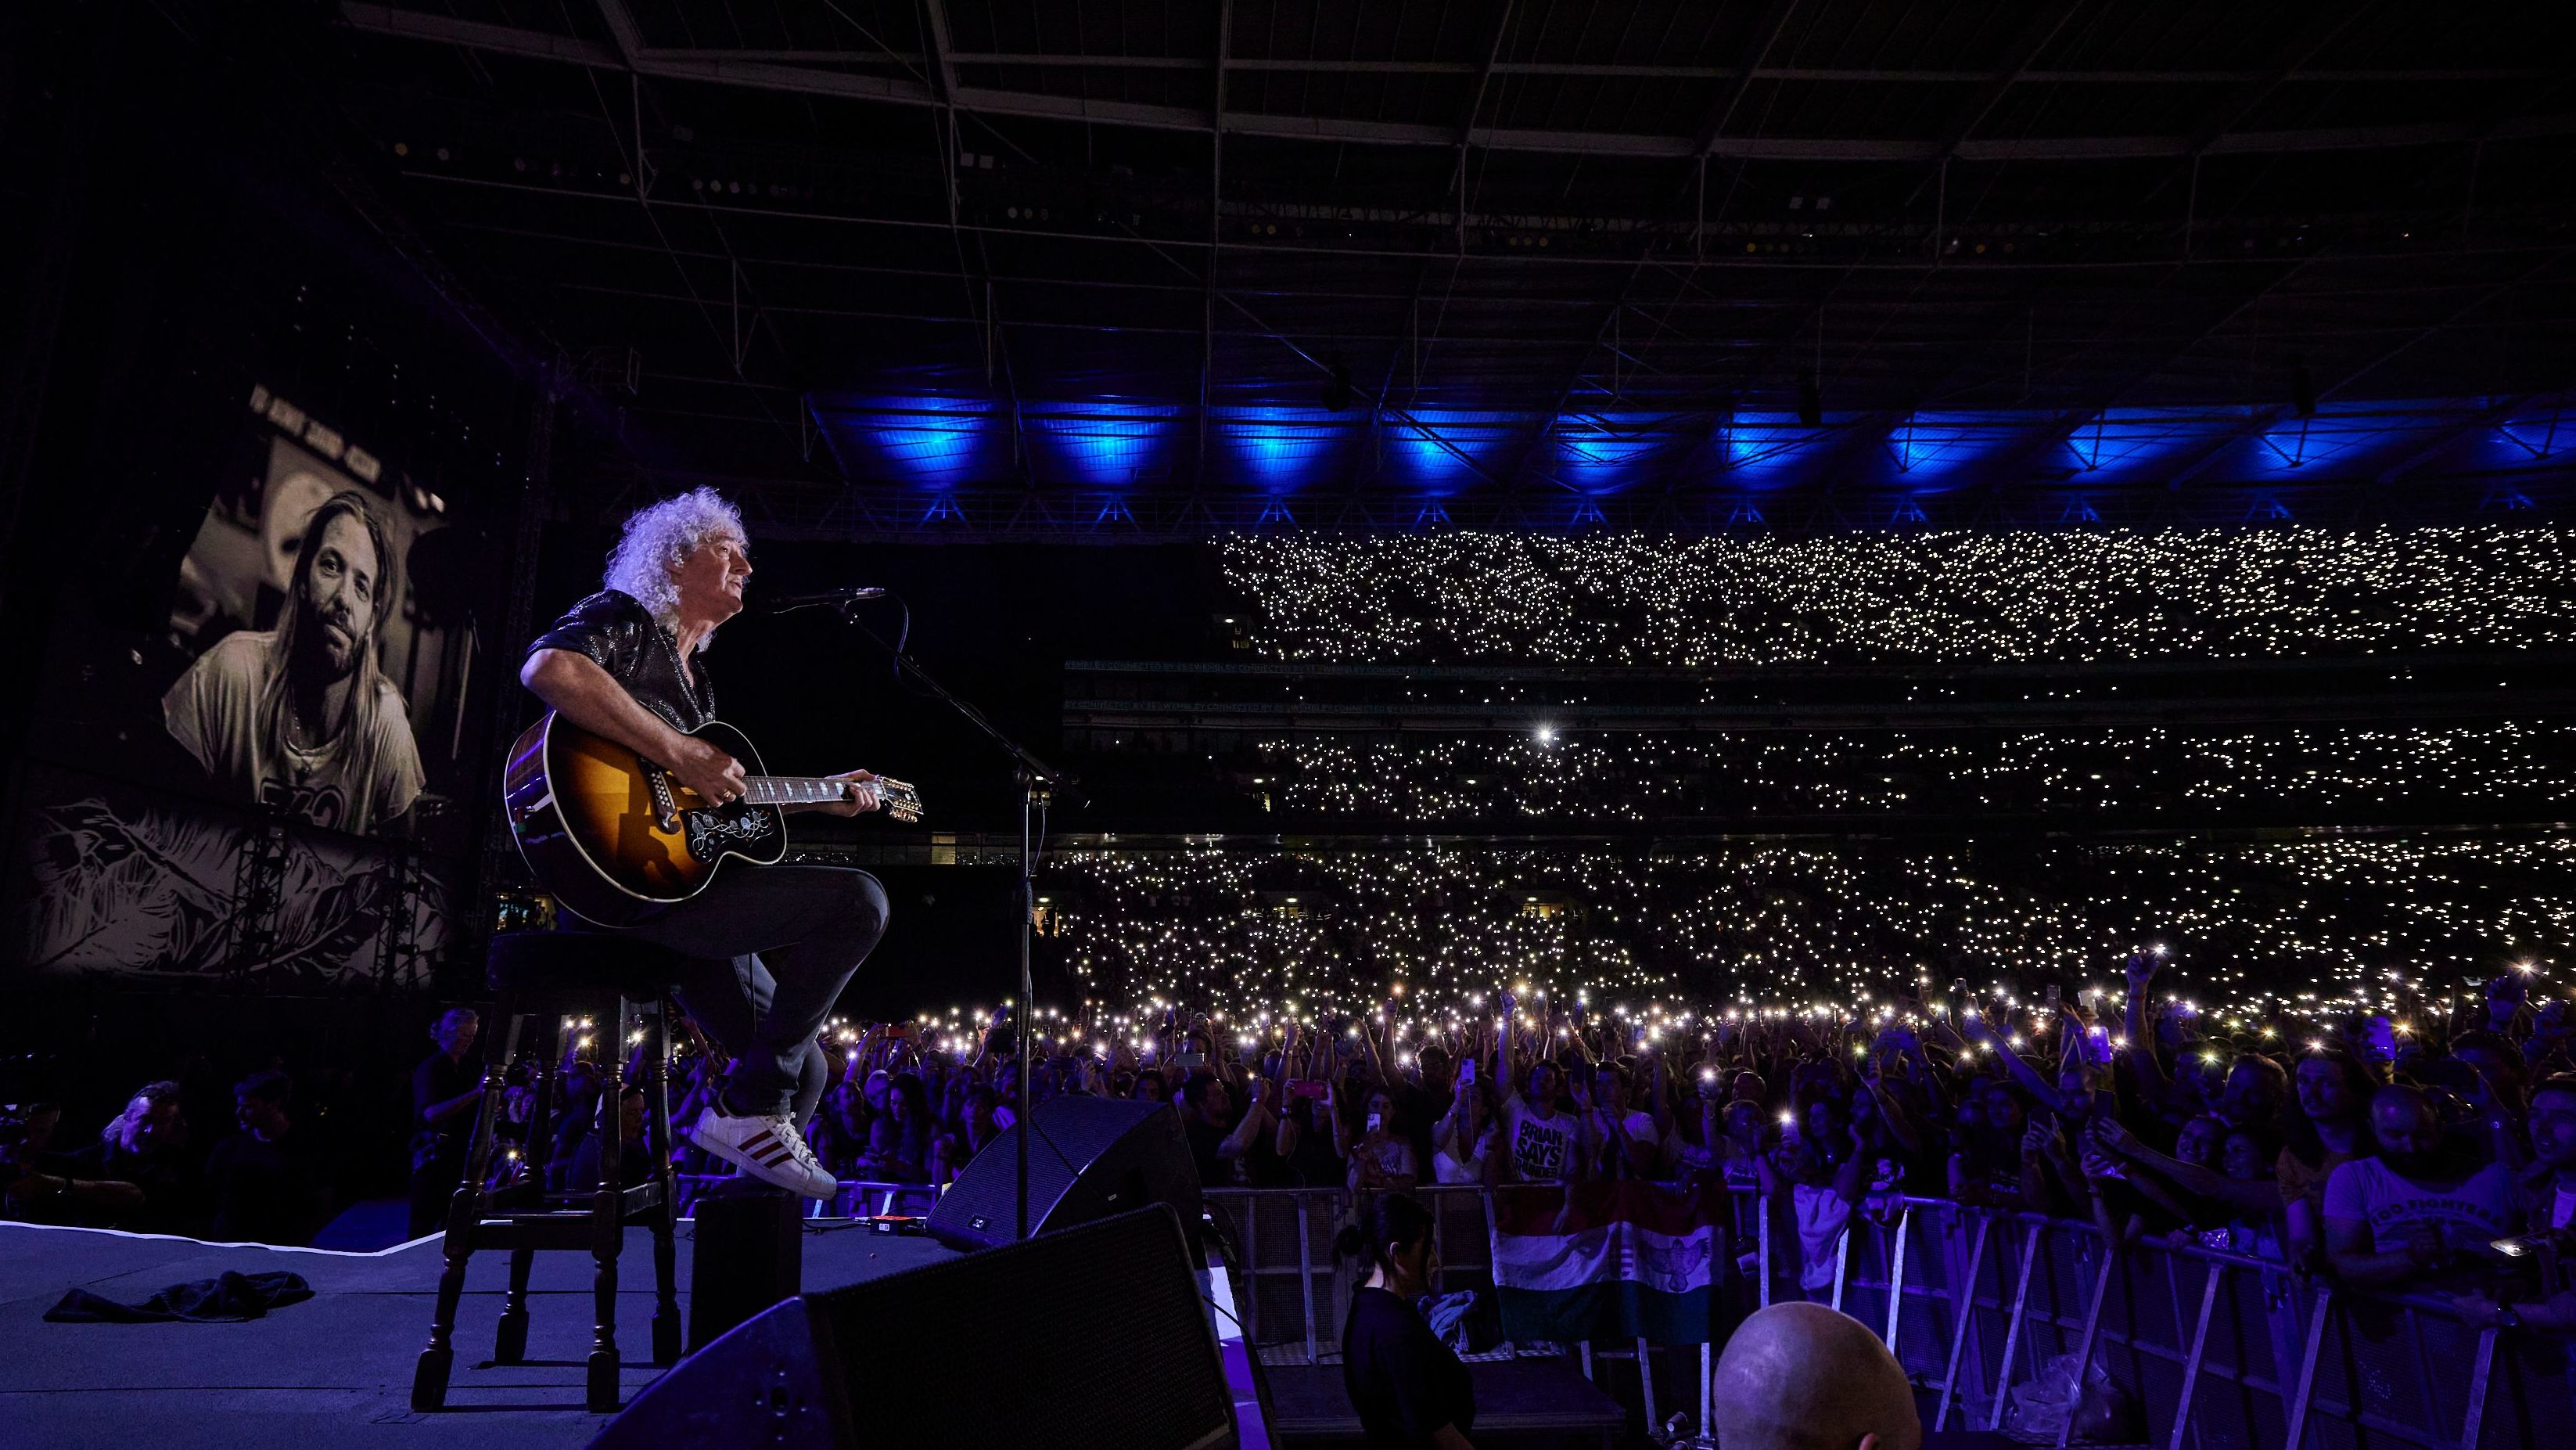 Queen's Brian May performs at a tribute concert in London for Foo Fighters drummer Taylor Hawkins on Saturday, September 3. Hawkins died in March at the age of 50. <a href="https://www.cnn.com/2022/09/04/uk/foo-fighters-taylor-hawkins-concert-intl-gbr-scli/index.html" target="_blank">A star-studded lineup,</a> which also included Paul McCartney and Liam Gallagher, joined the Foo Fighters for Saturday's concert.